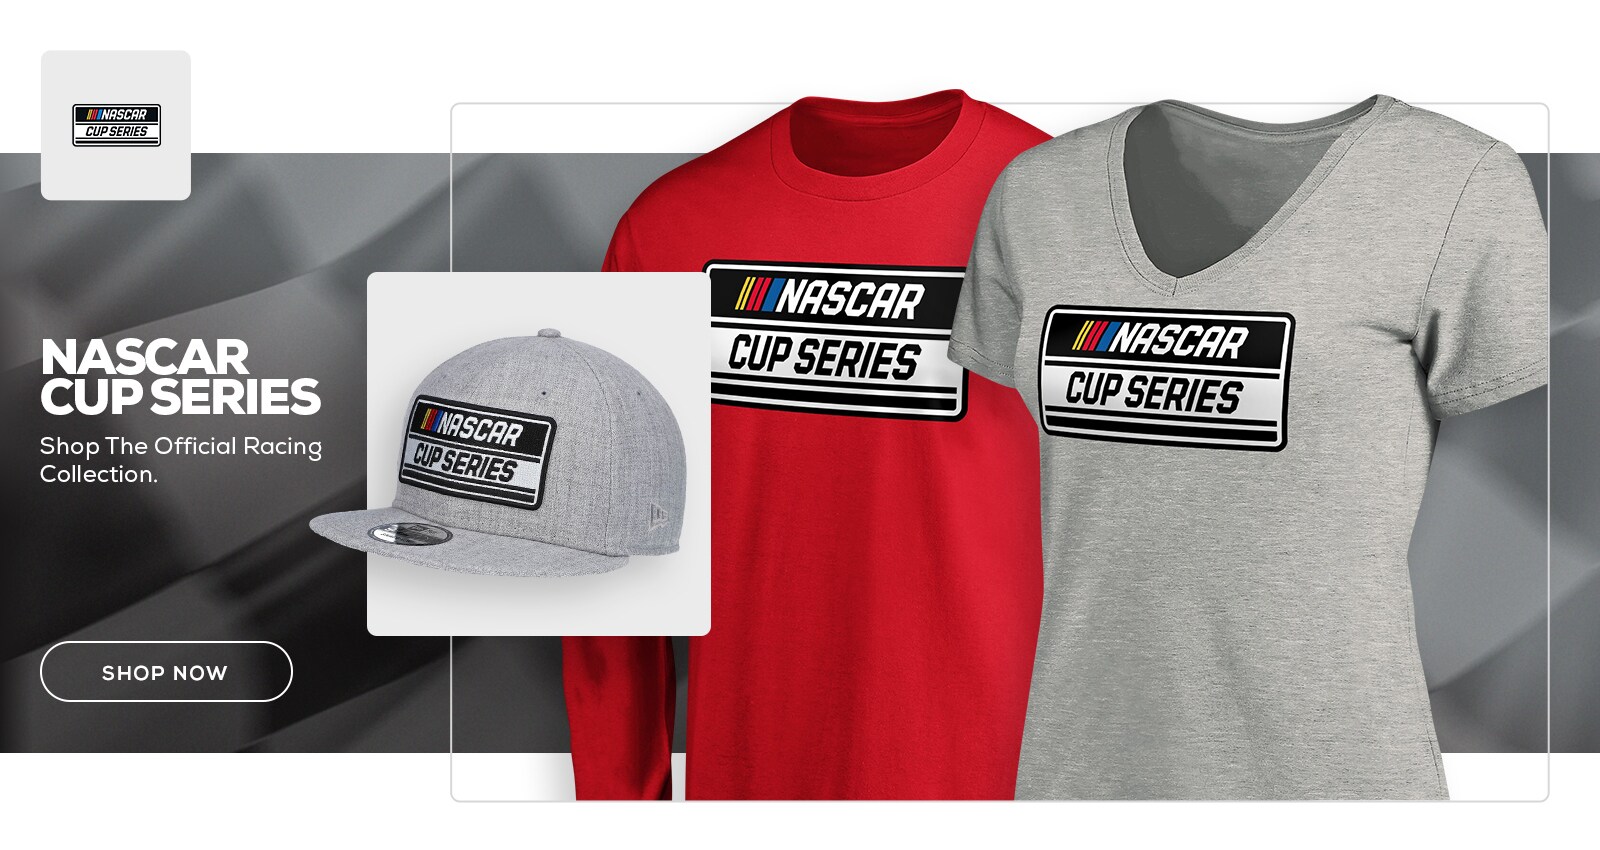 NASCAR CUP SERIES.         Shop The Official Racing Collection.